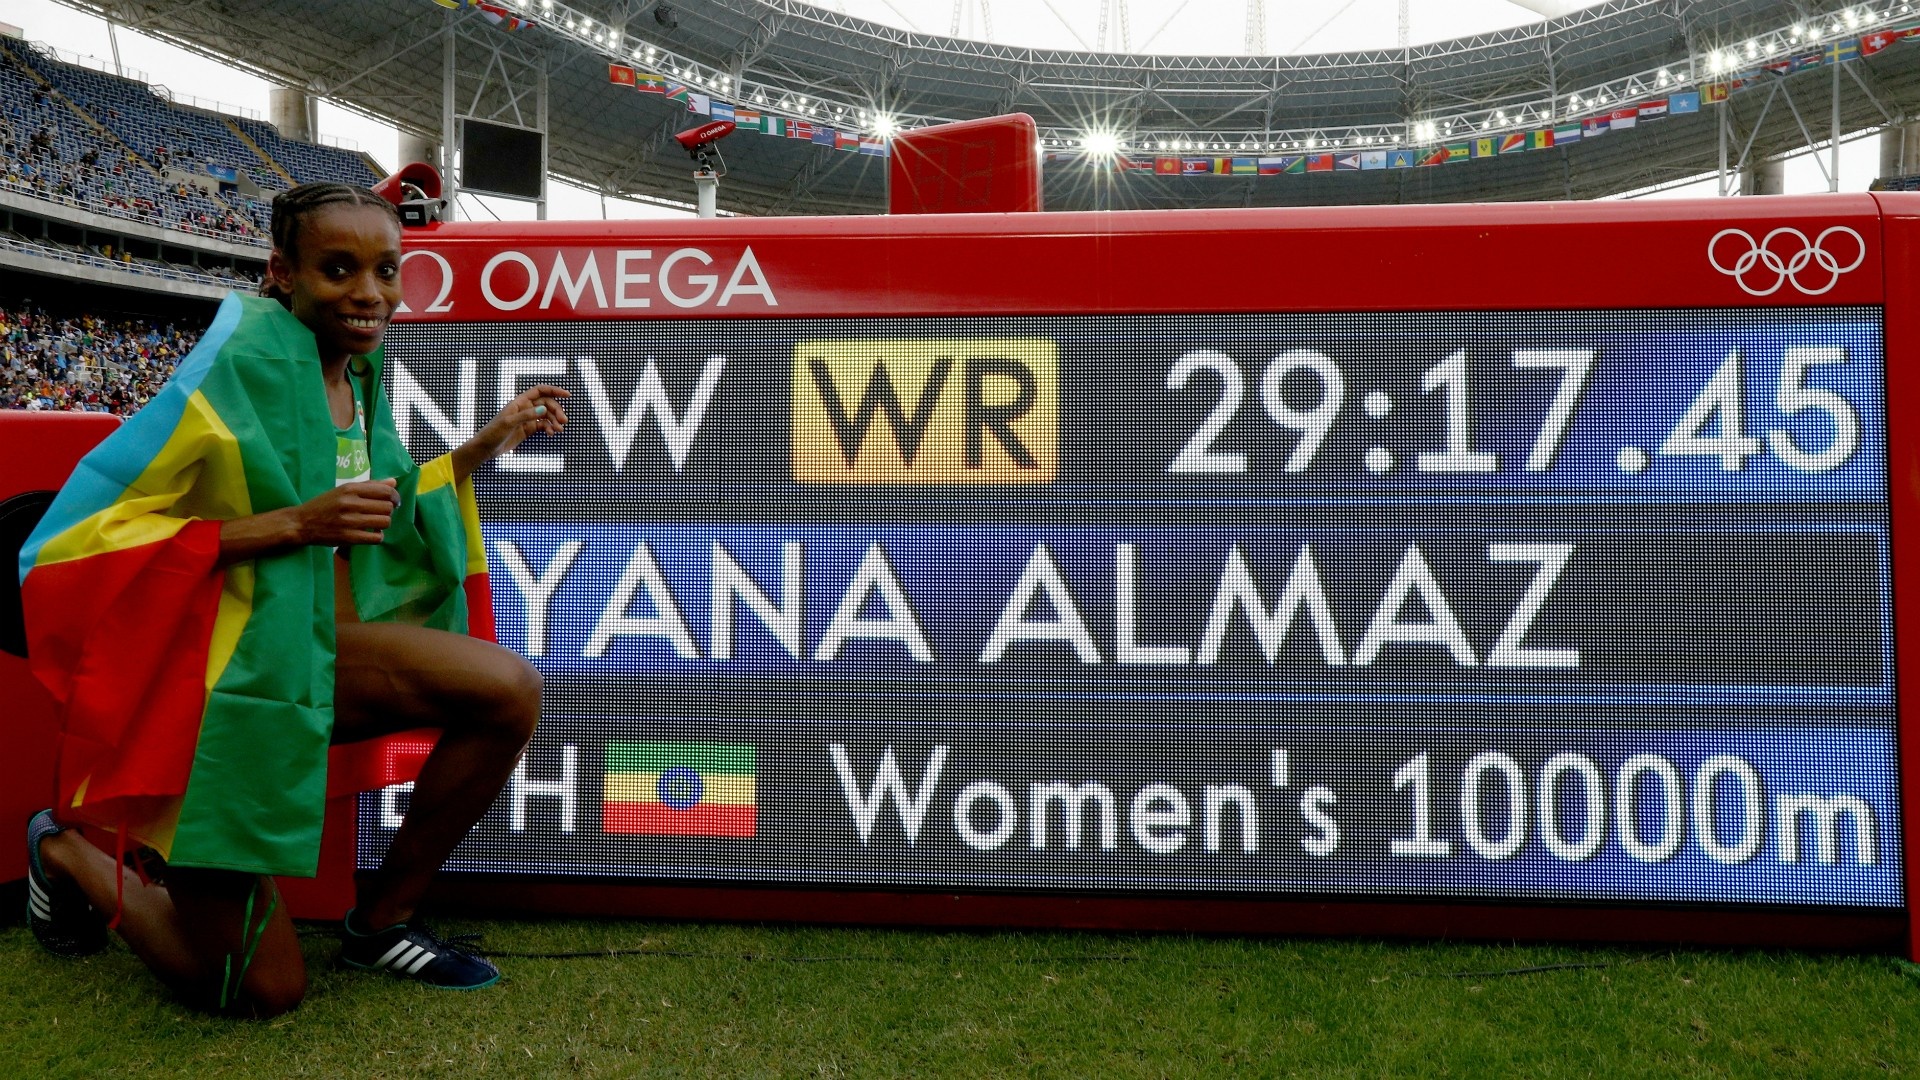 Almaz Ayana, Rio Olympics, Doping allegations, Track and field controversy, 1920x1080 Full HD Desktop